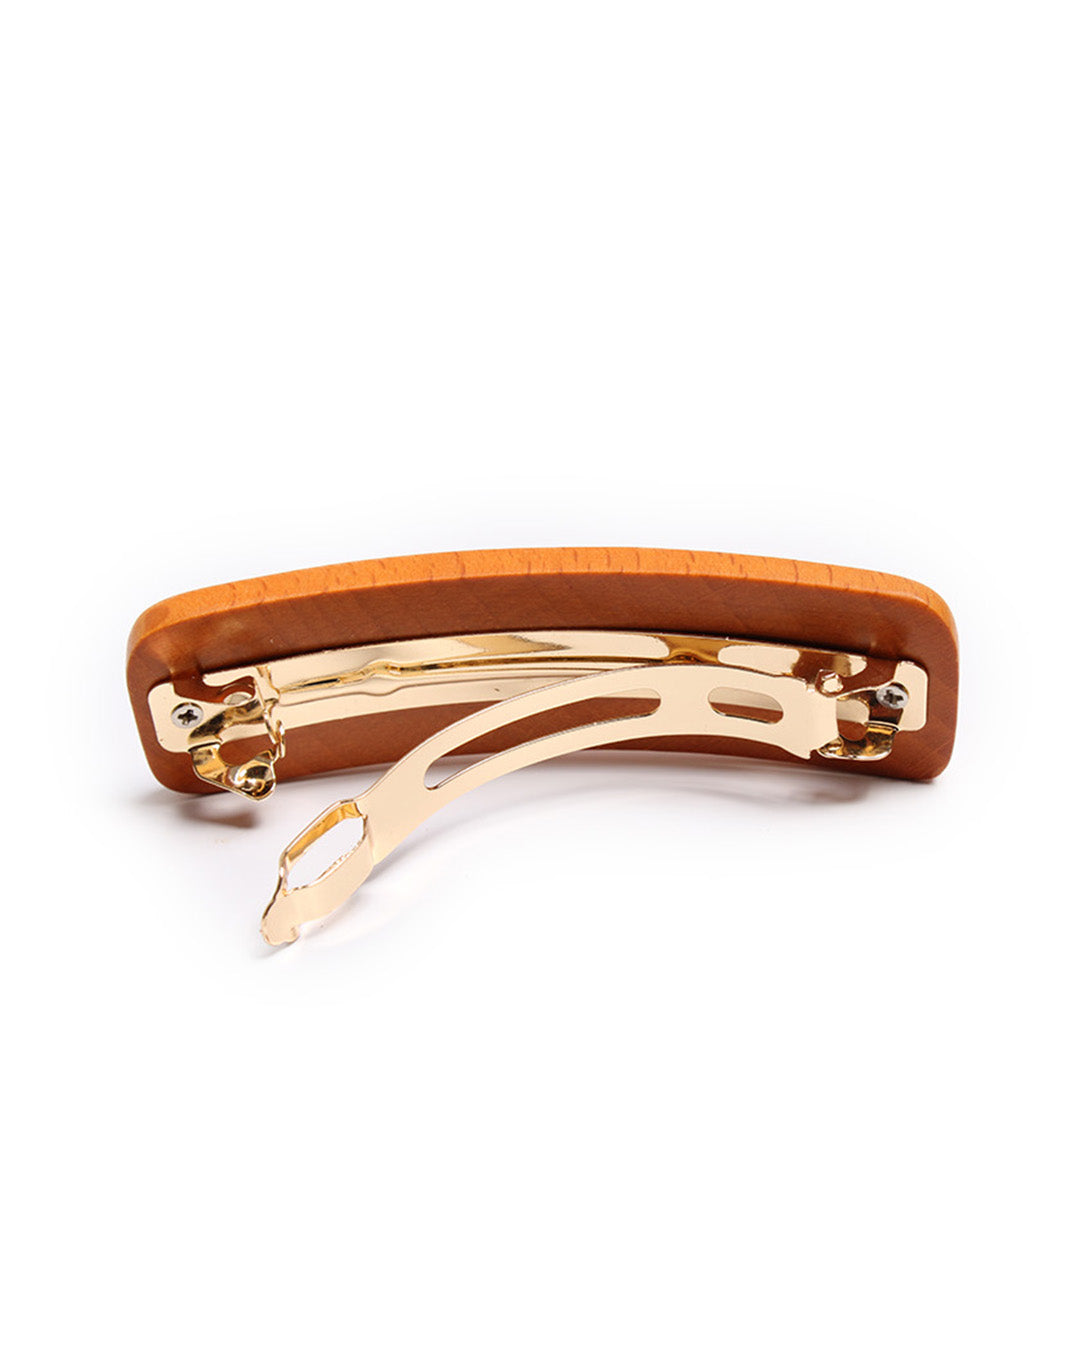 BANDED Women's Hair Accessories Beech Wood - 3 Pack French Barrettes